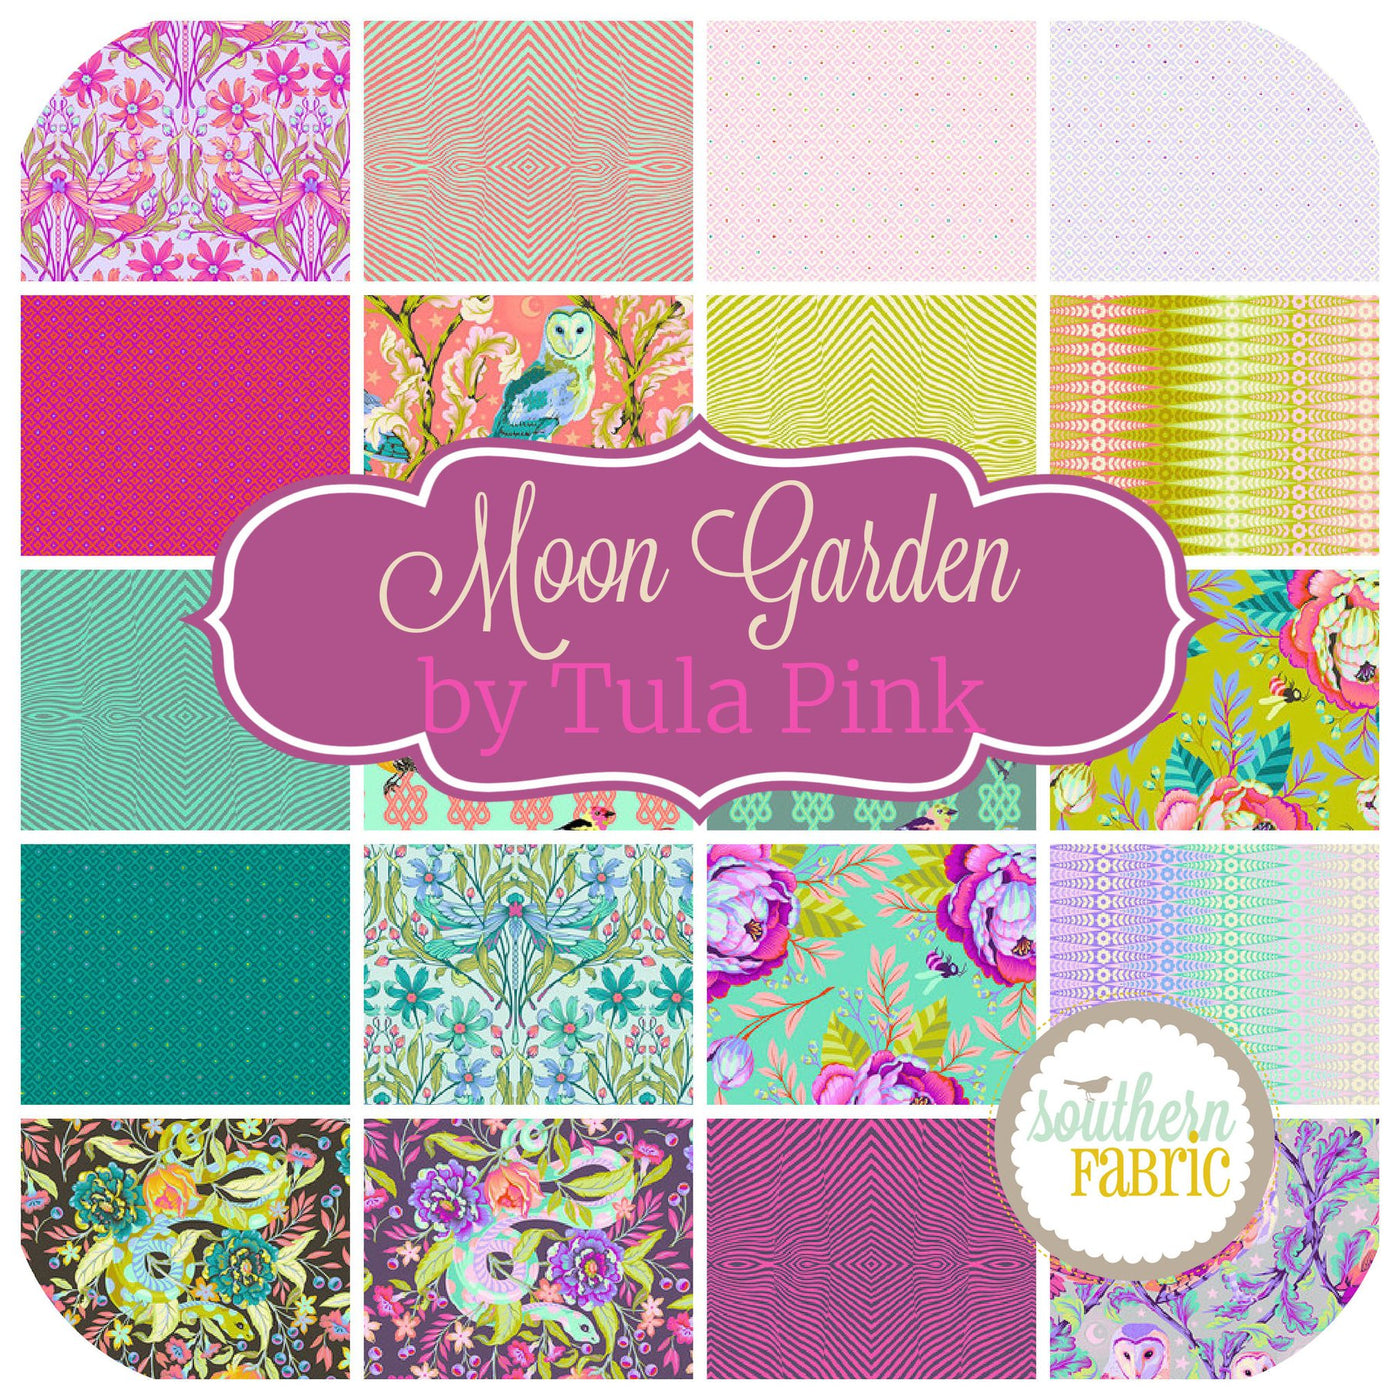 Moon Garden Jelly Roll (40 pcs) by Tula Pink for Free Spirit (FB4DRTP.MOON)